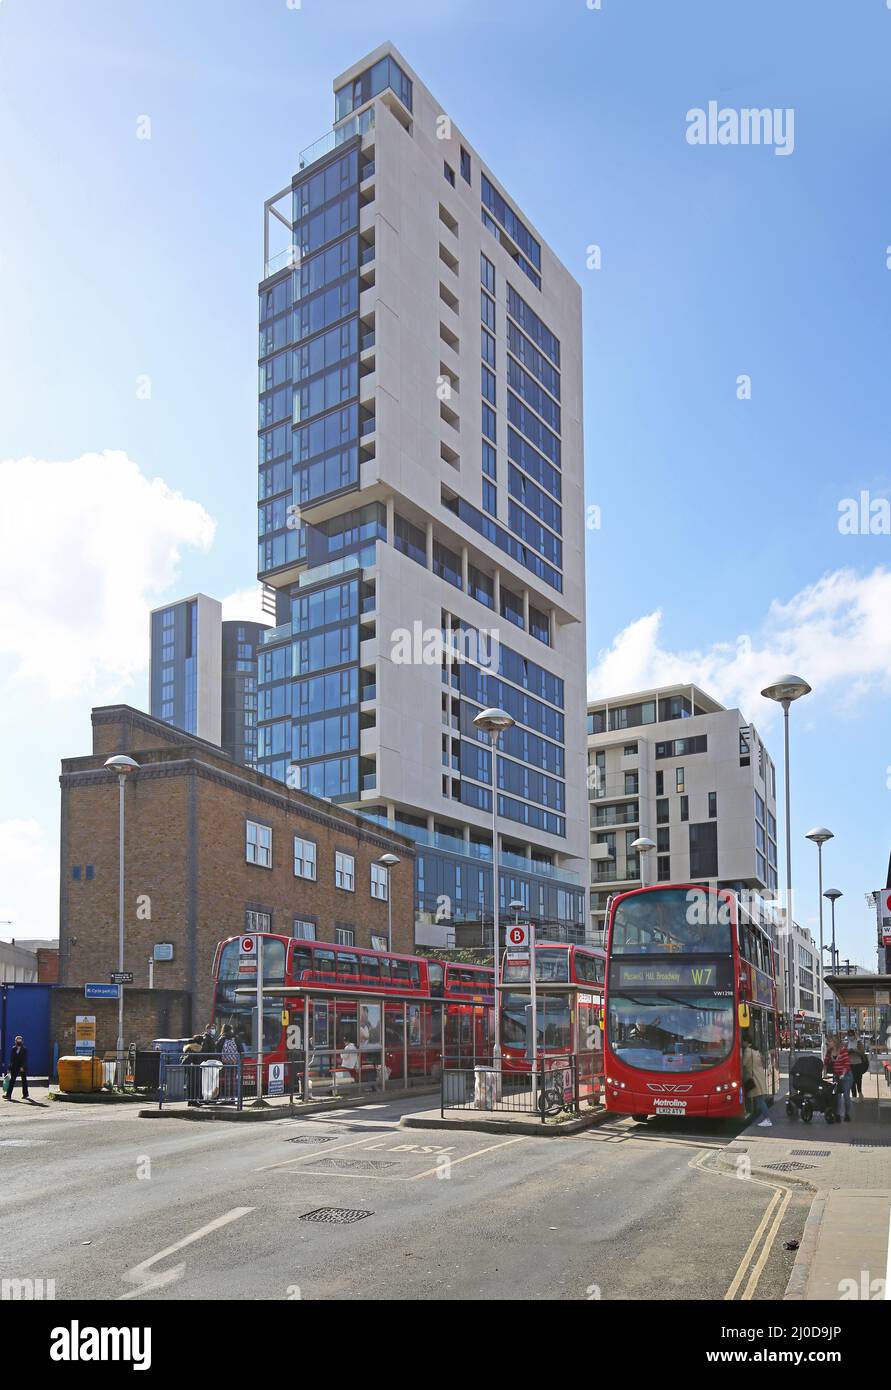 Finsbury Park, London, UK. Wells Terrace bus interchange with towers of the new City North residential development in the background. Stock Photo